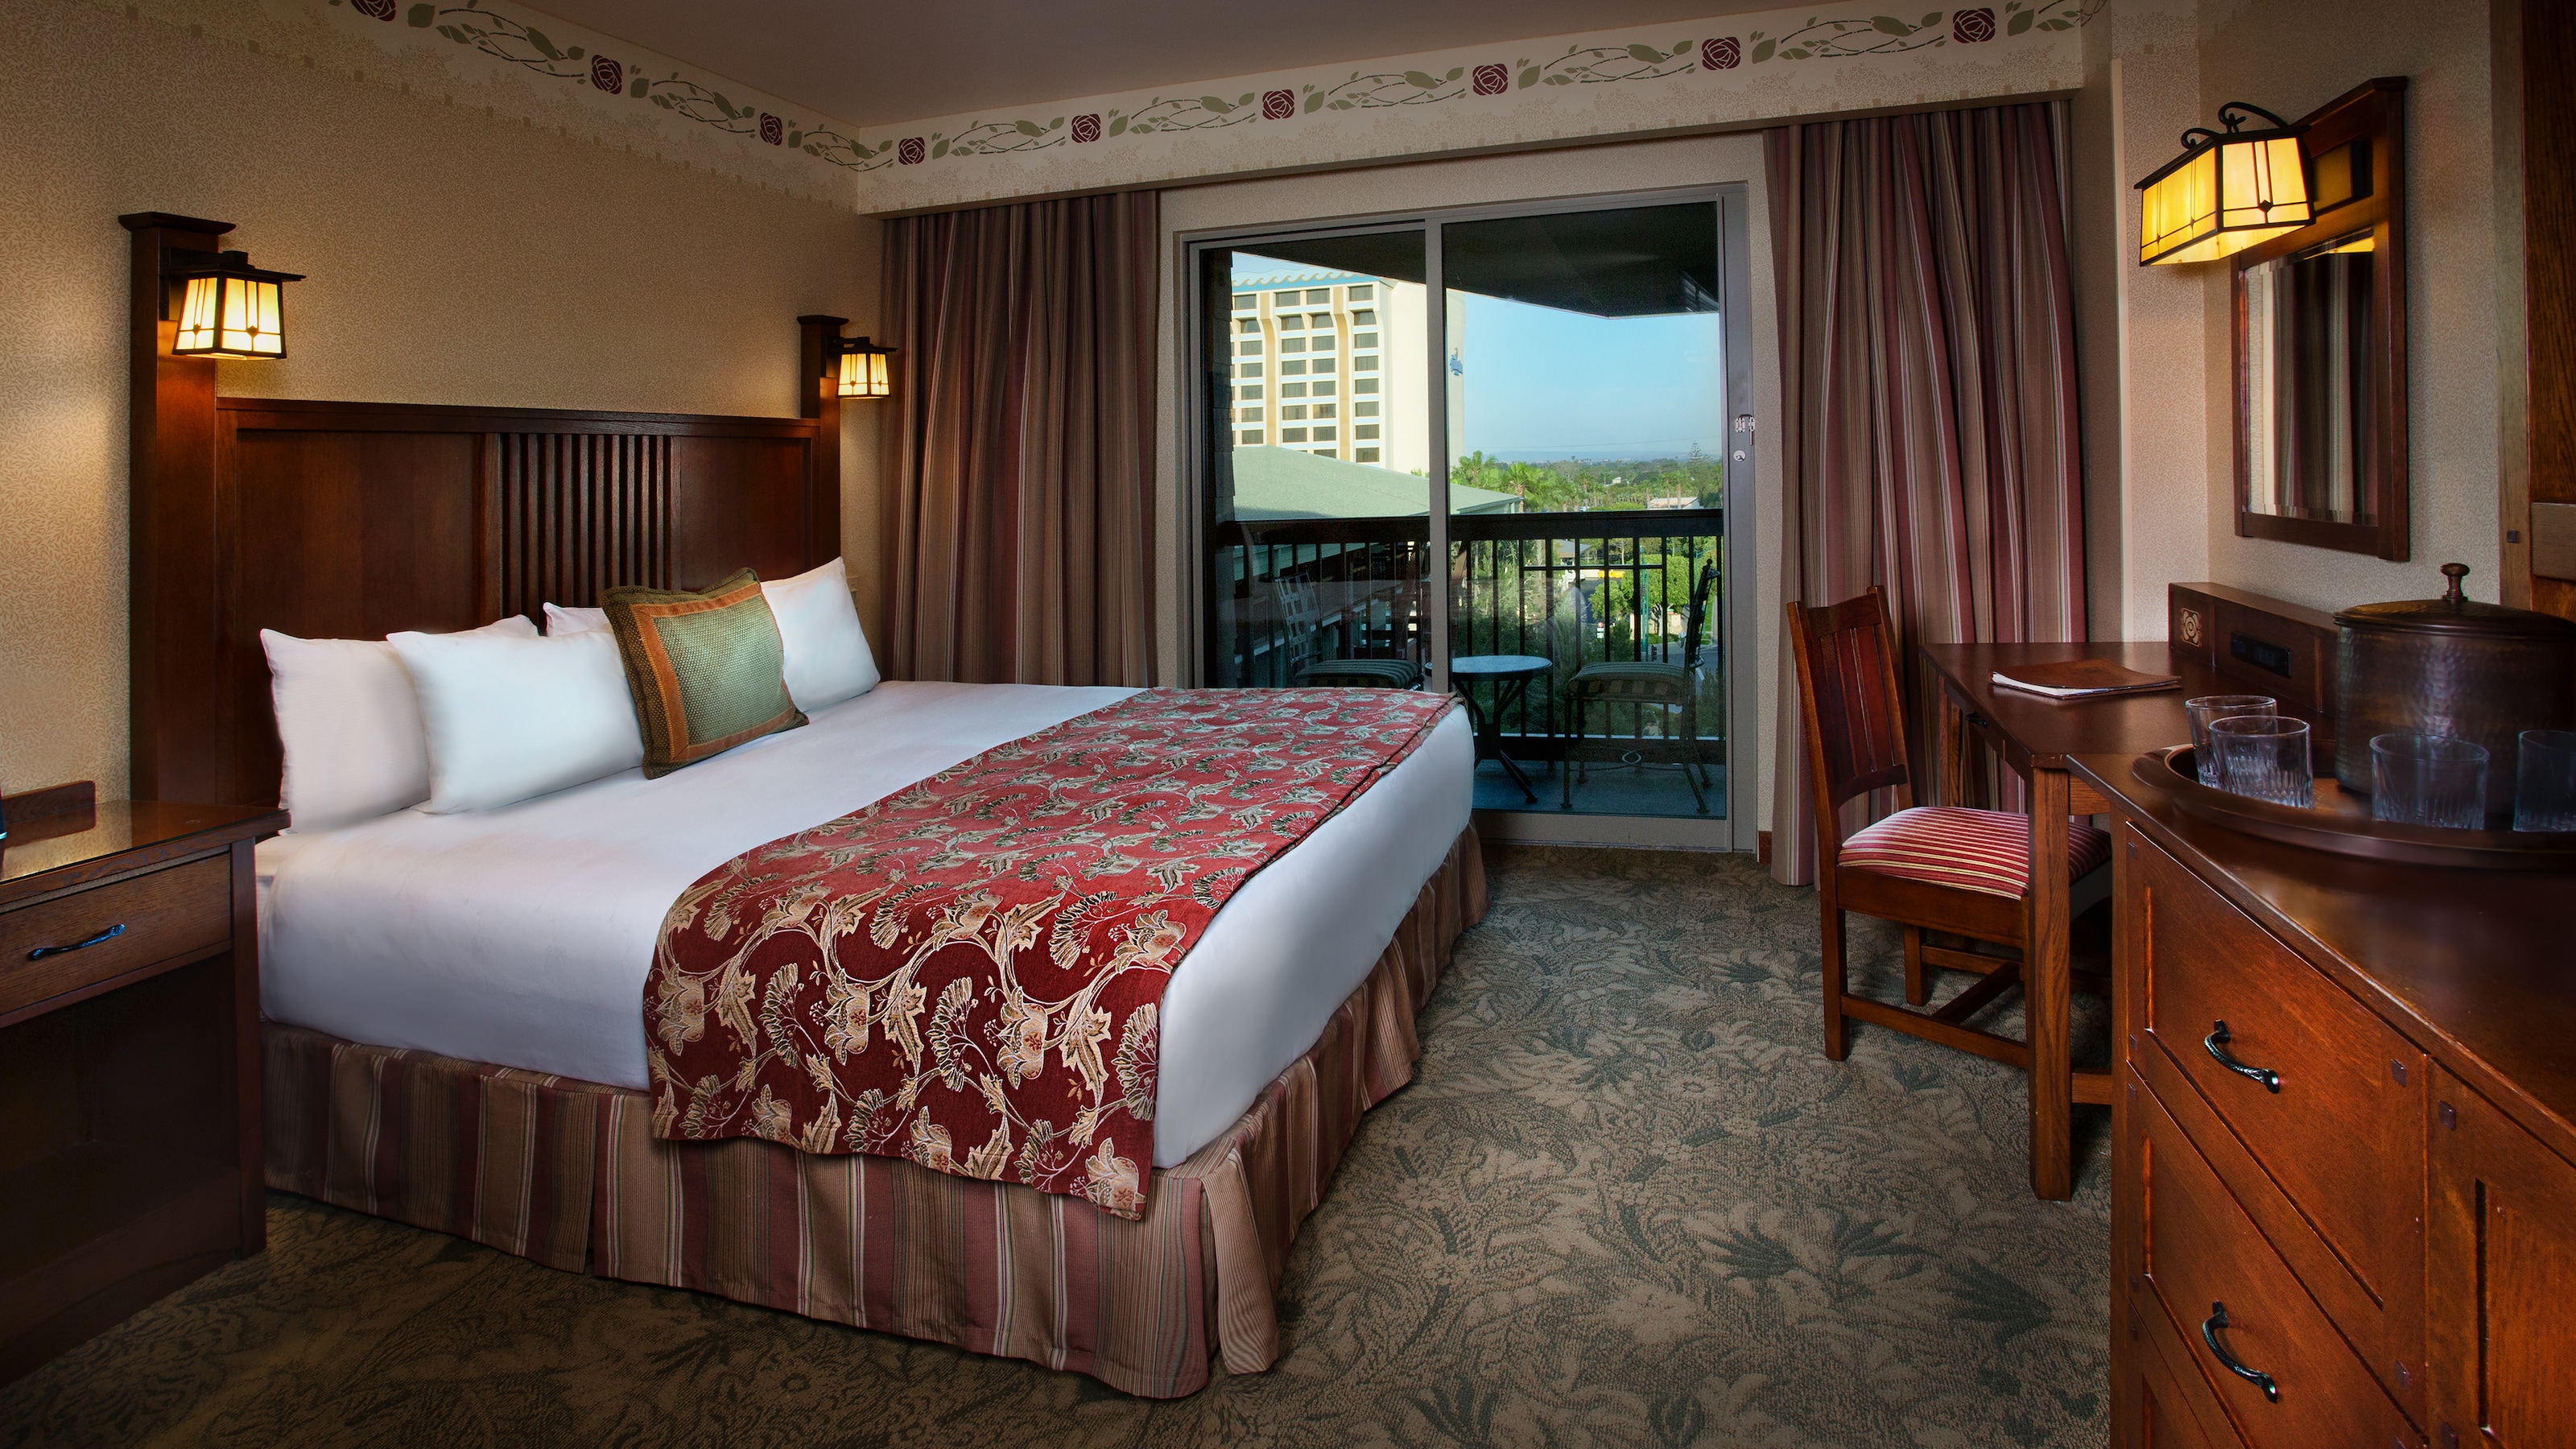 Rooms Points The Villas At Disney S Grand Californian